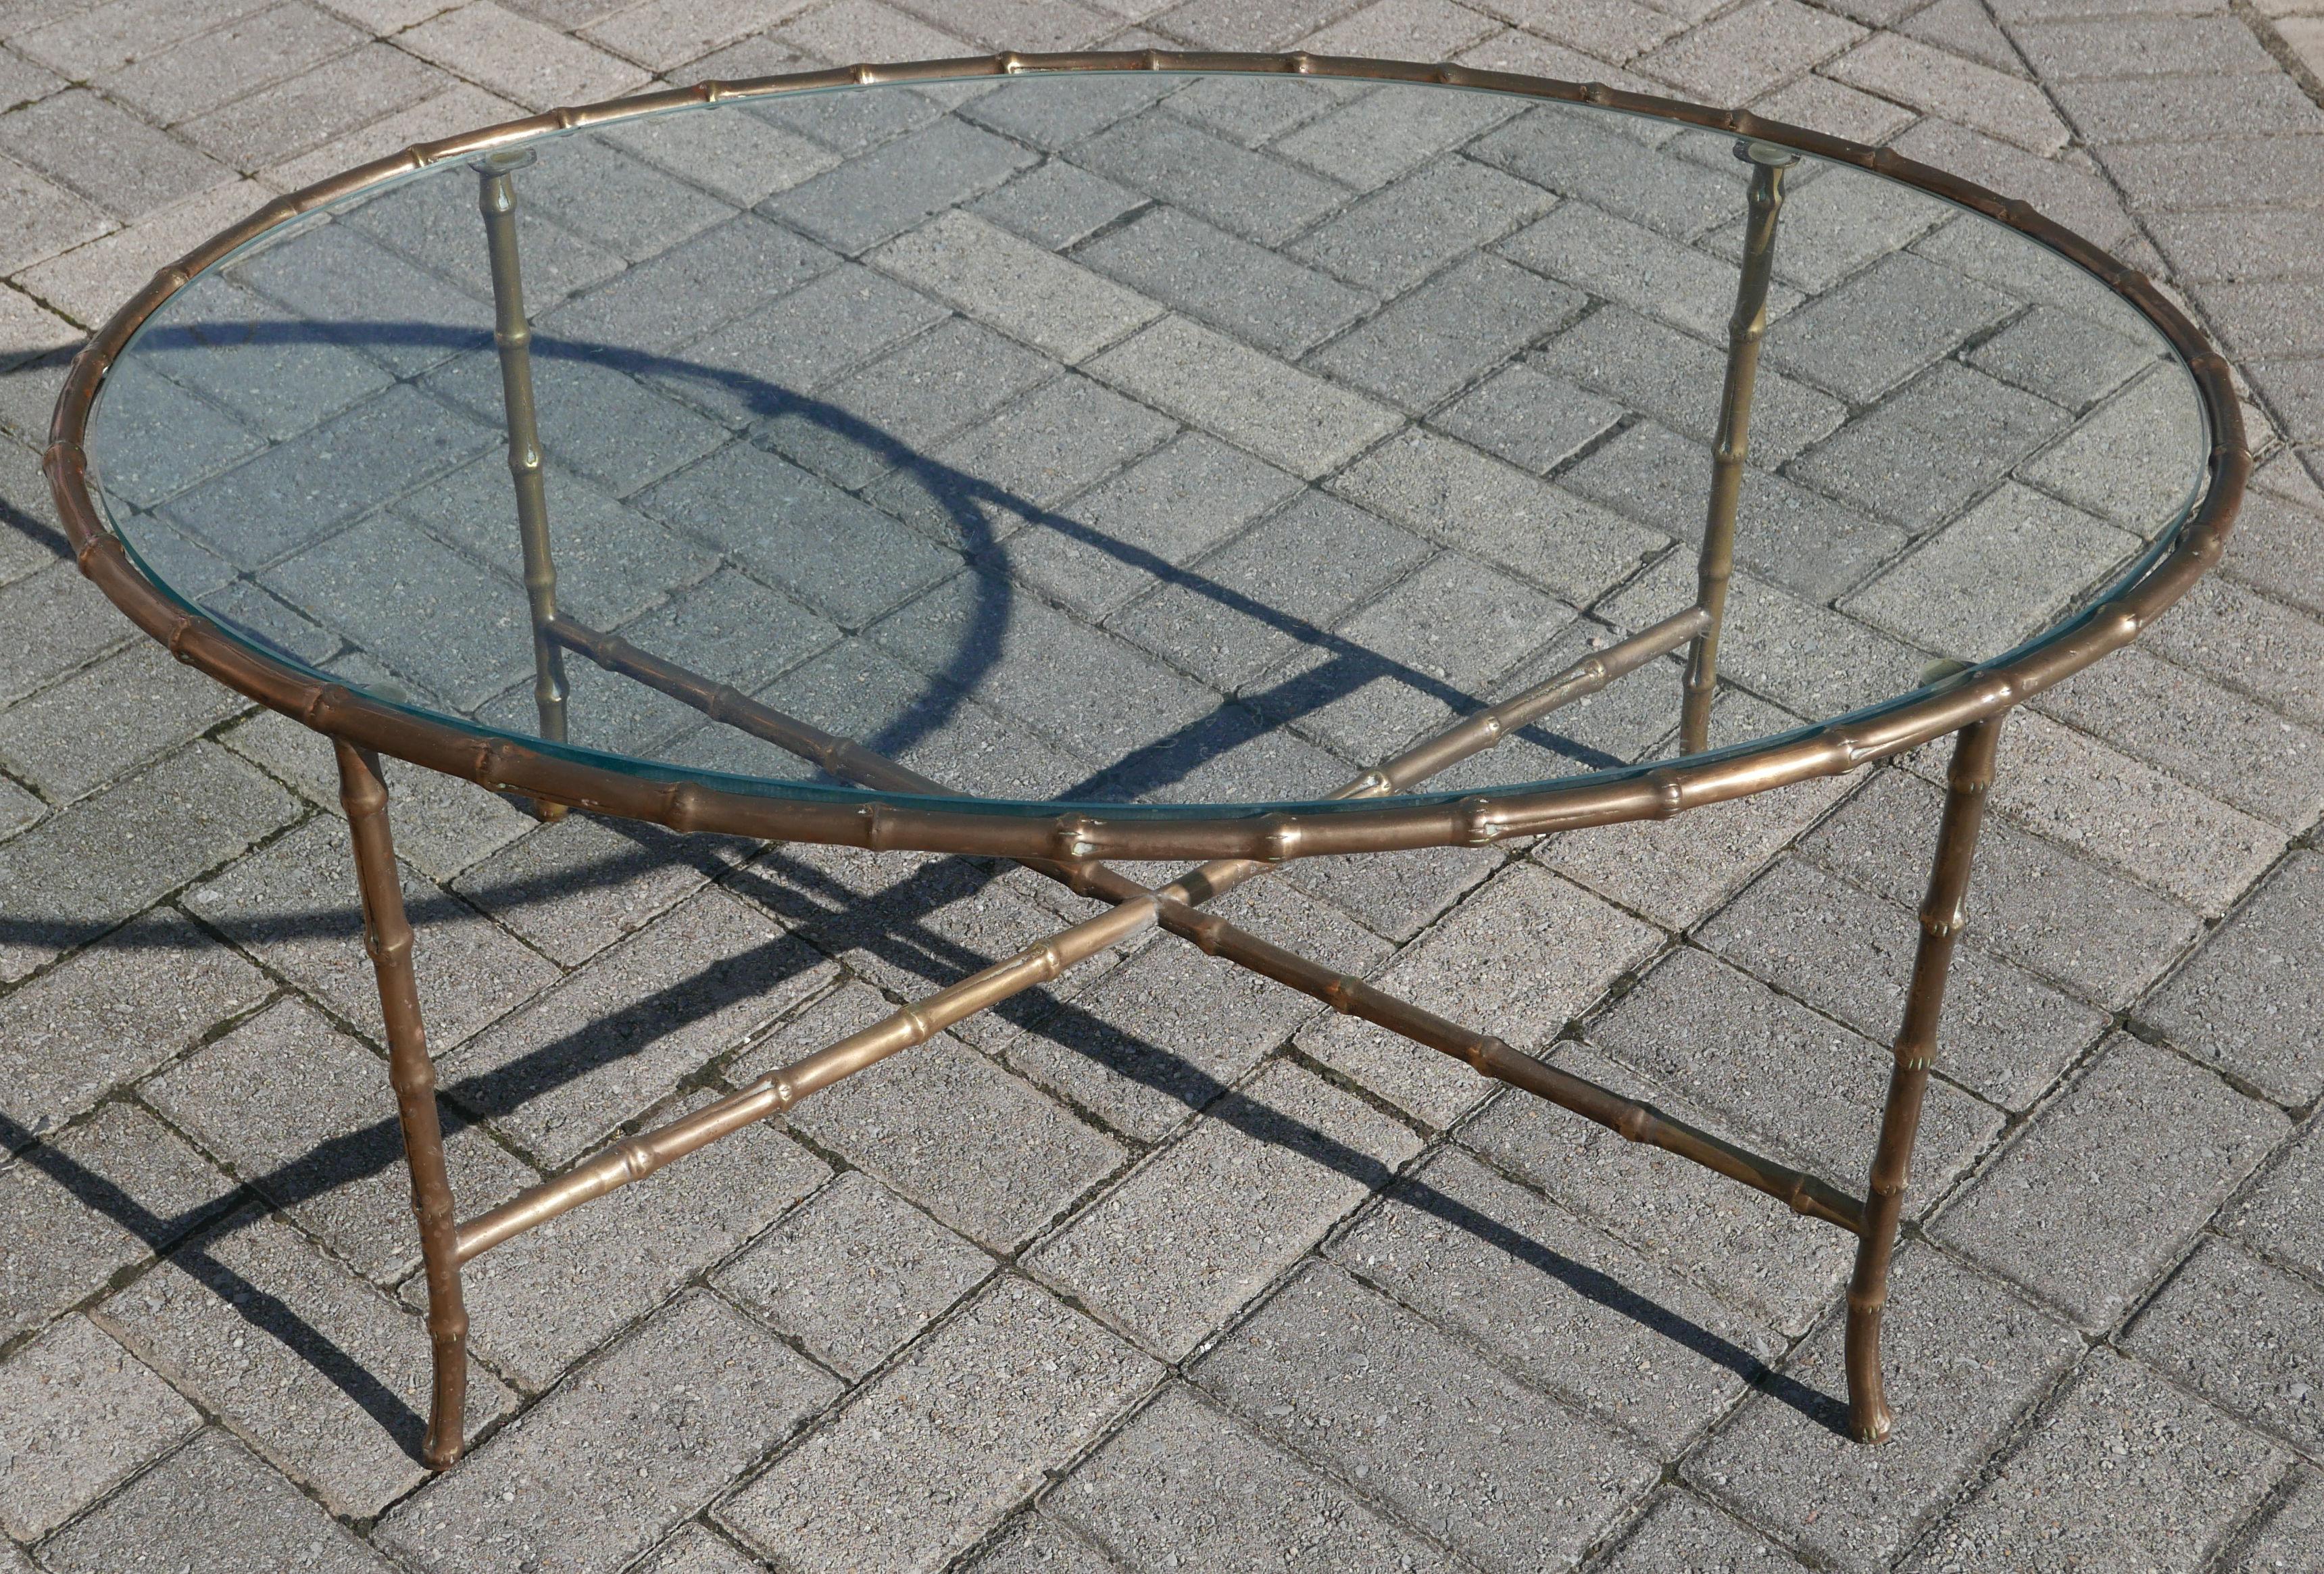 One of the nicest coffee tables I've had by Baguès over the years being quite a bit heavier gauge bronze than most I’ve had over the years. Wonderful chinoiserie elegance, which lends itself to being used in both modern and traditional settings.